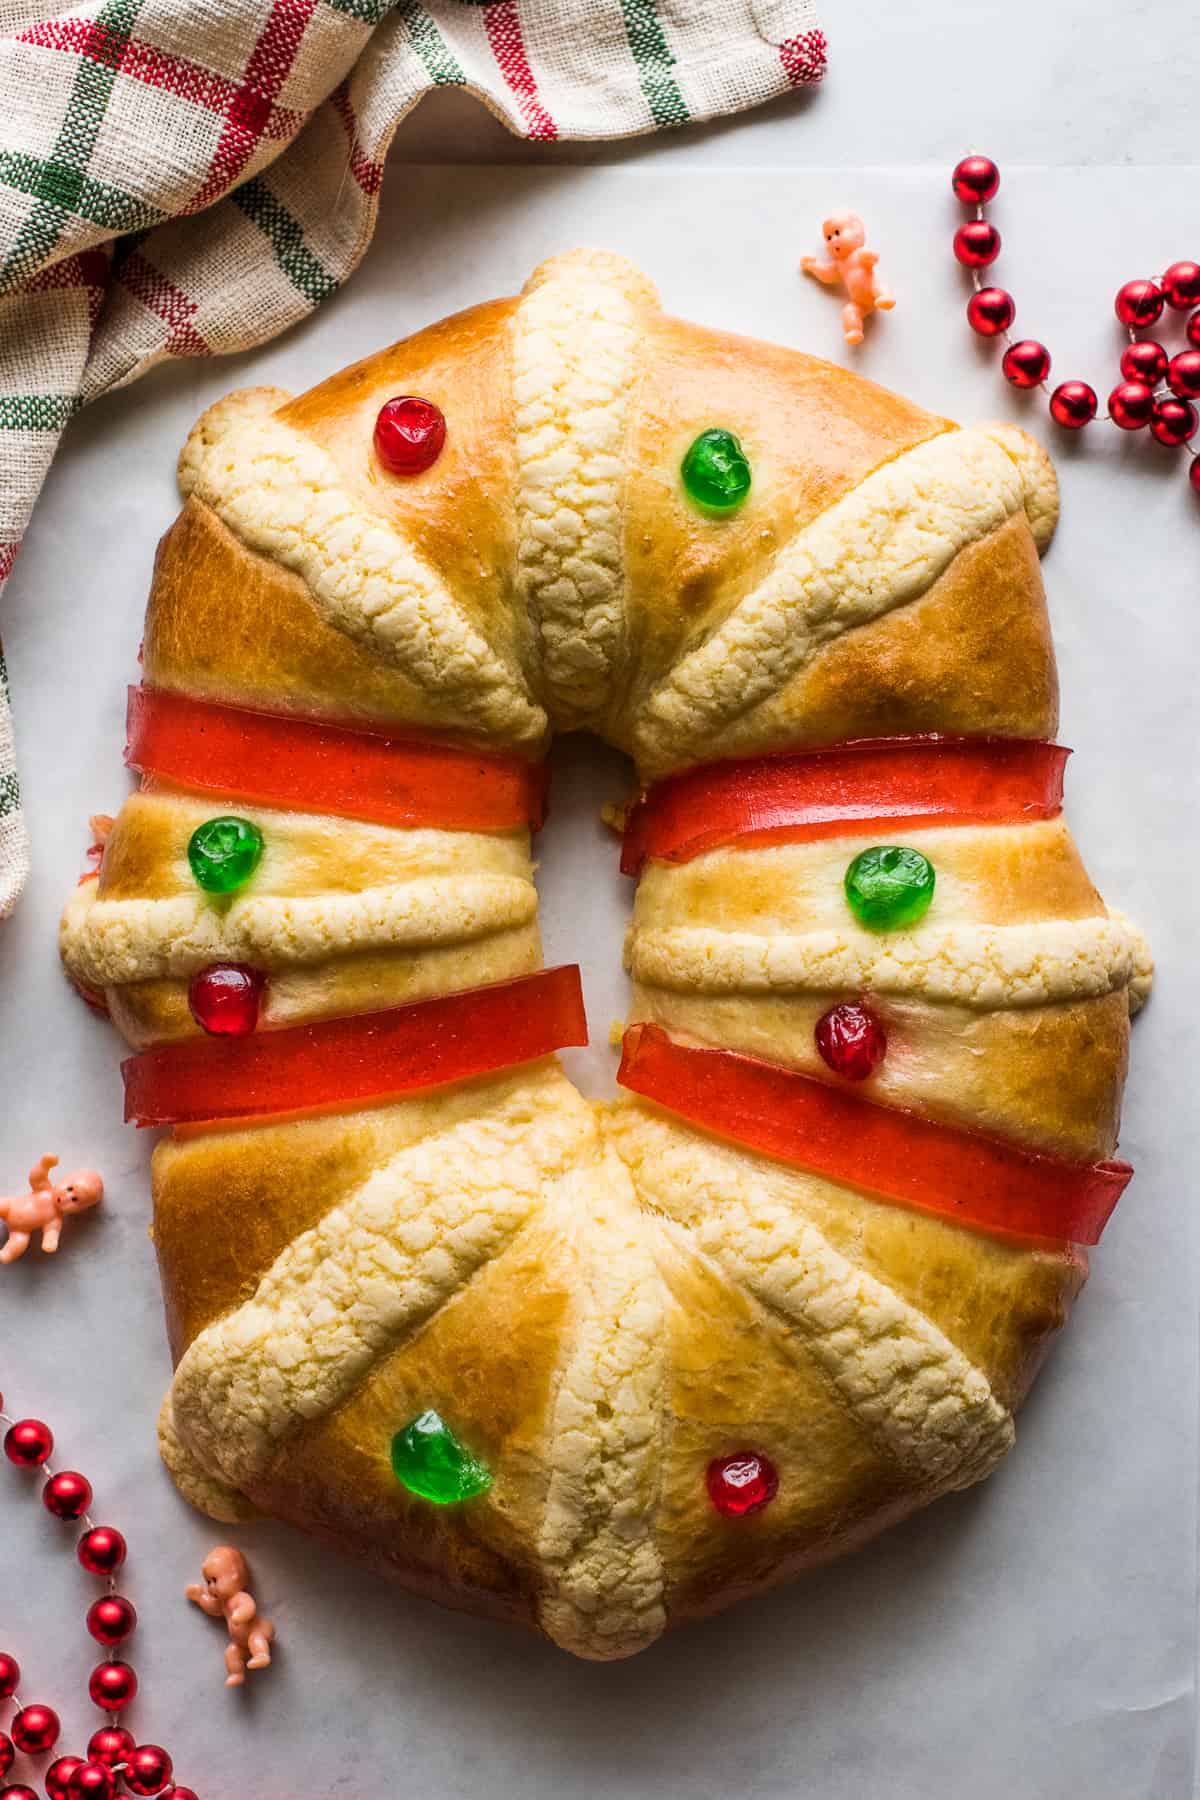 Rosca de Reyes decorated with candied cherries, guava paste and baby Jesus figurines on a table.